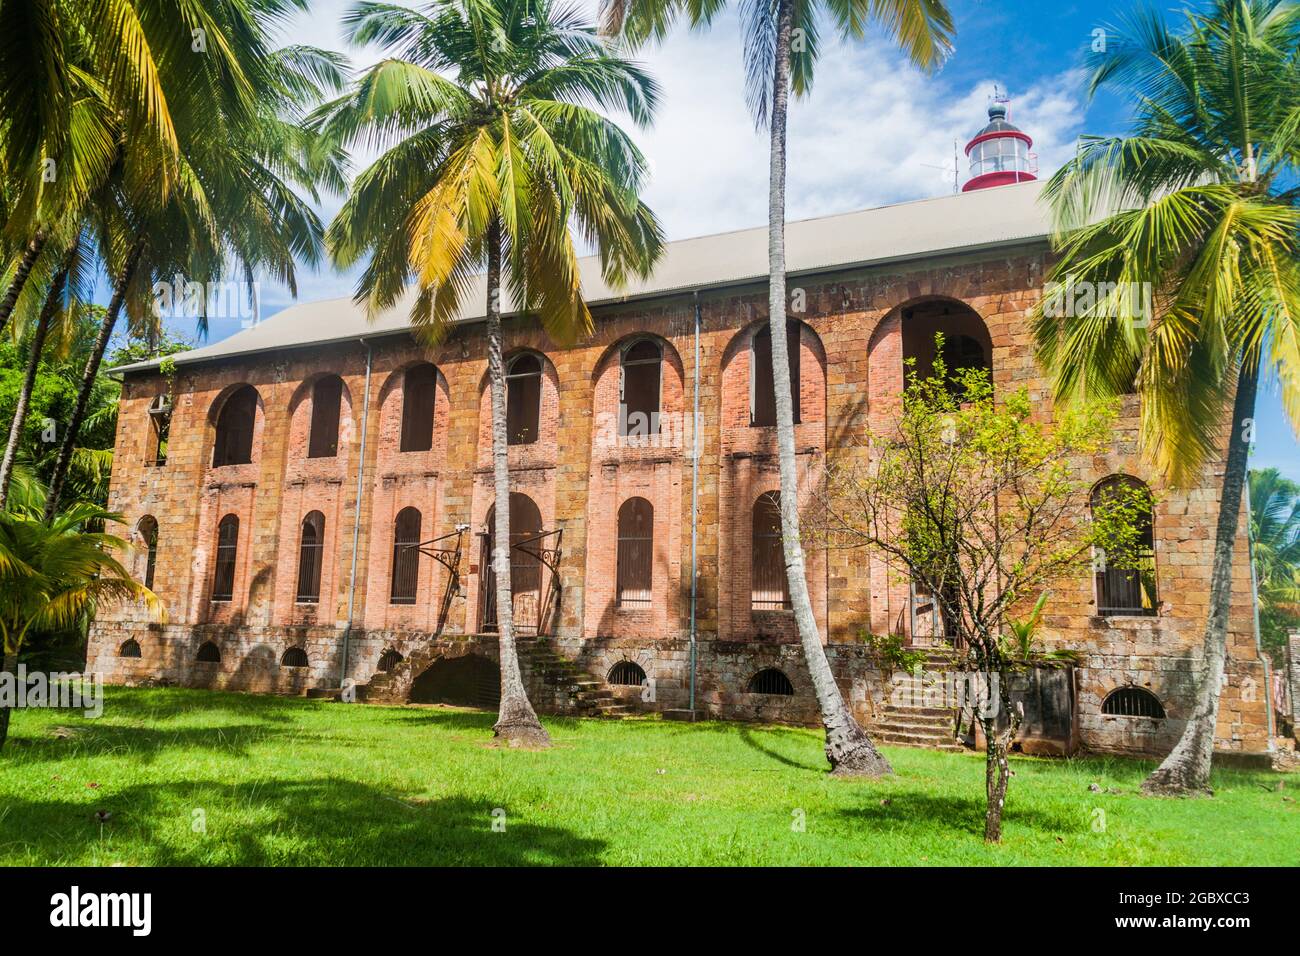 Former penal colony at Ile Royale, one of the islands of Iles du Salut (Islands of Salvation) in French Guiana Stock Photo